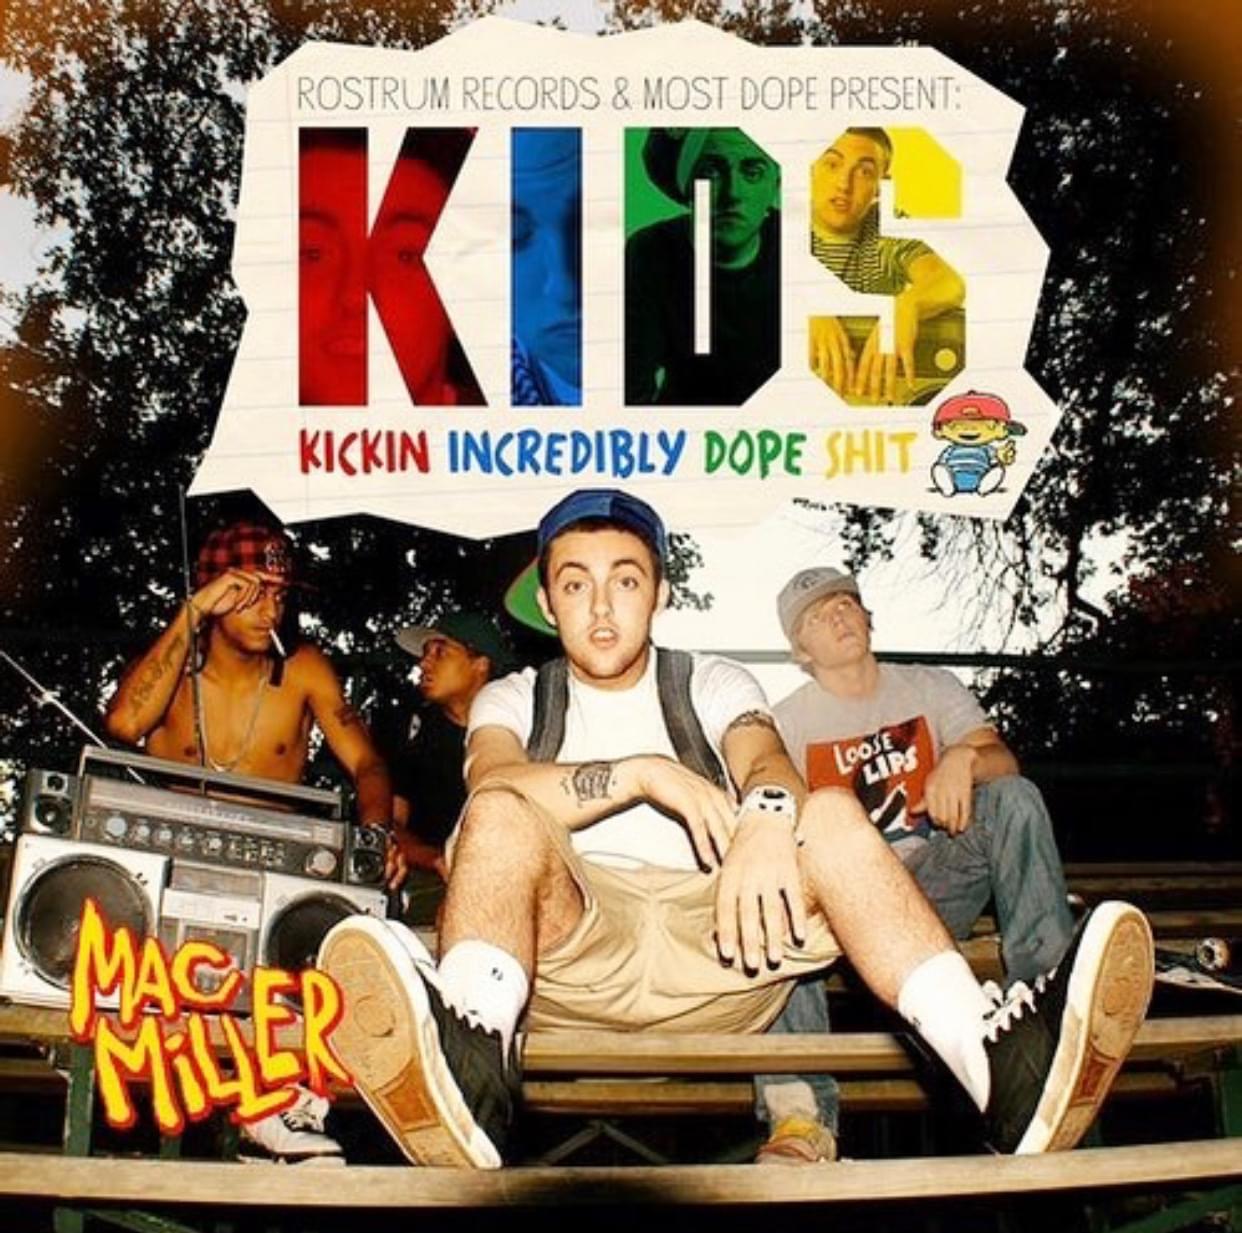 Mac Miller’s Mixtape “K.I.D.S” Is Coming To Streaming Services